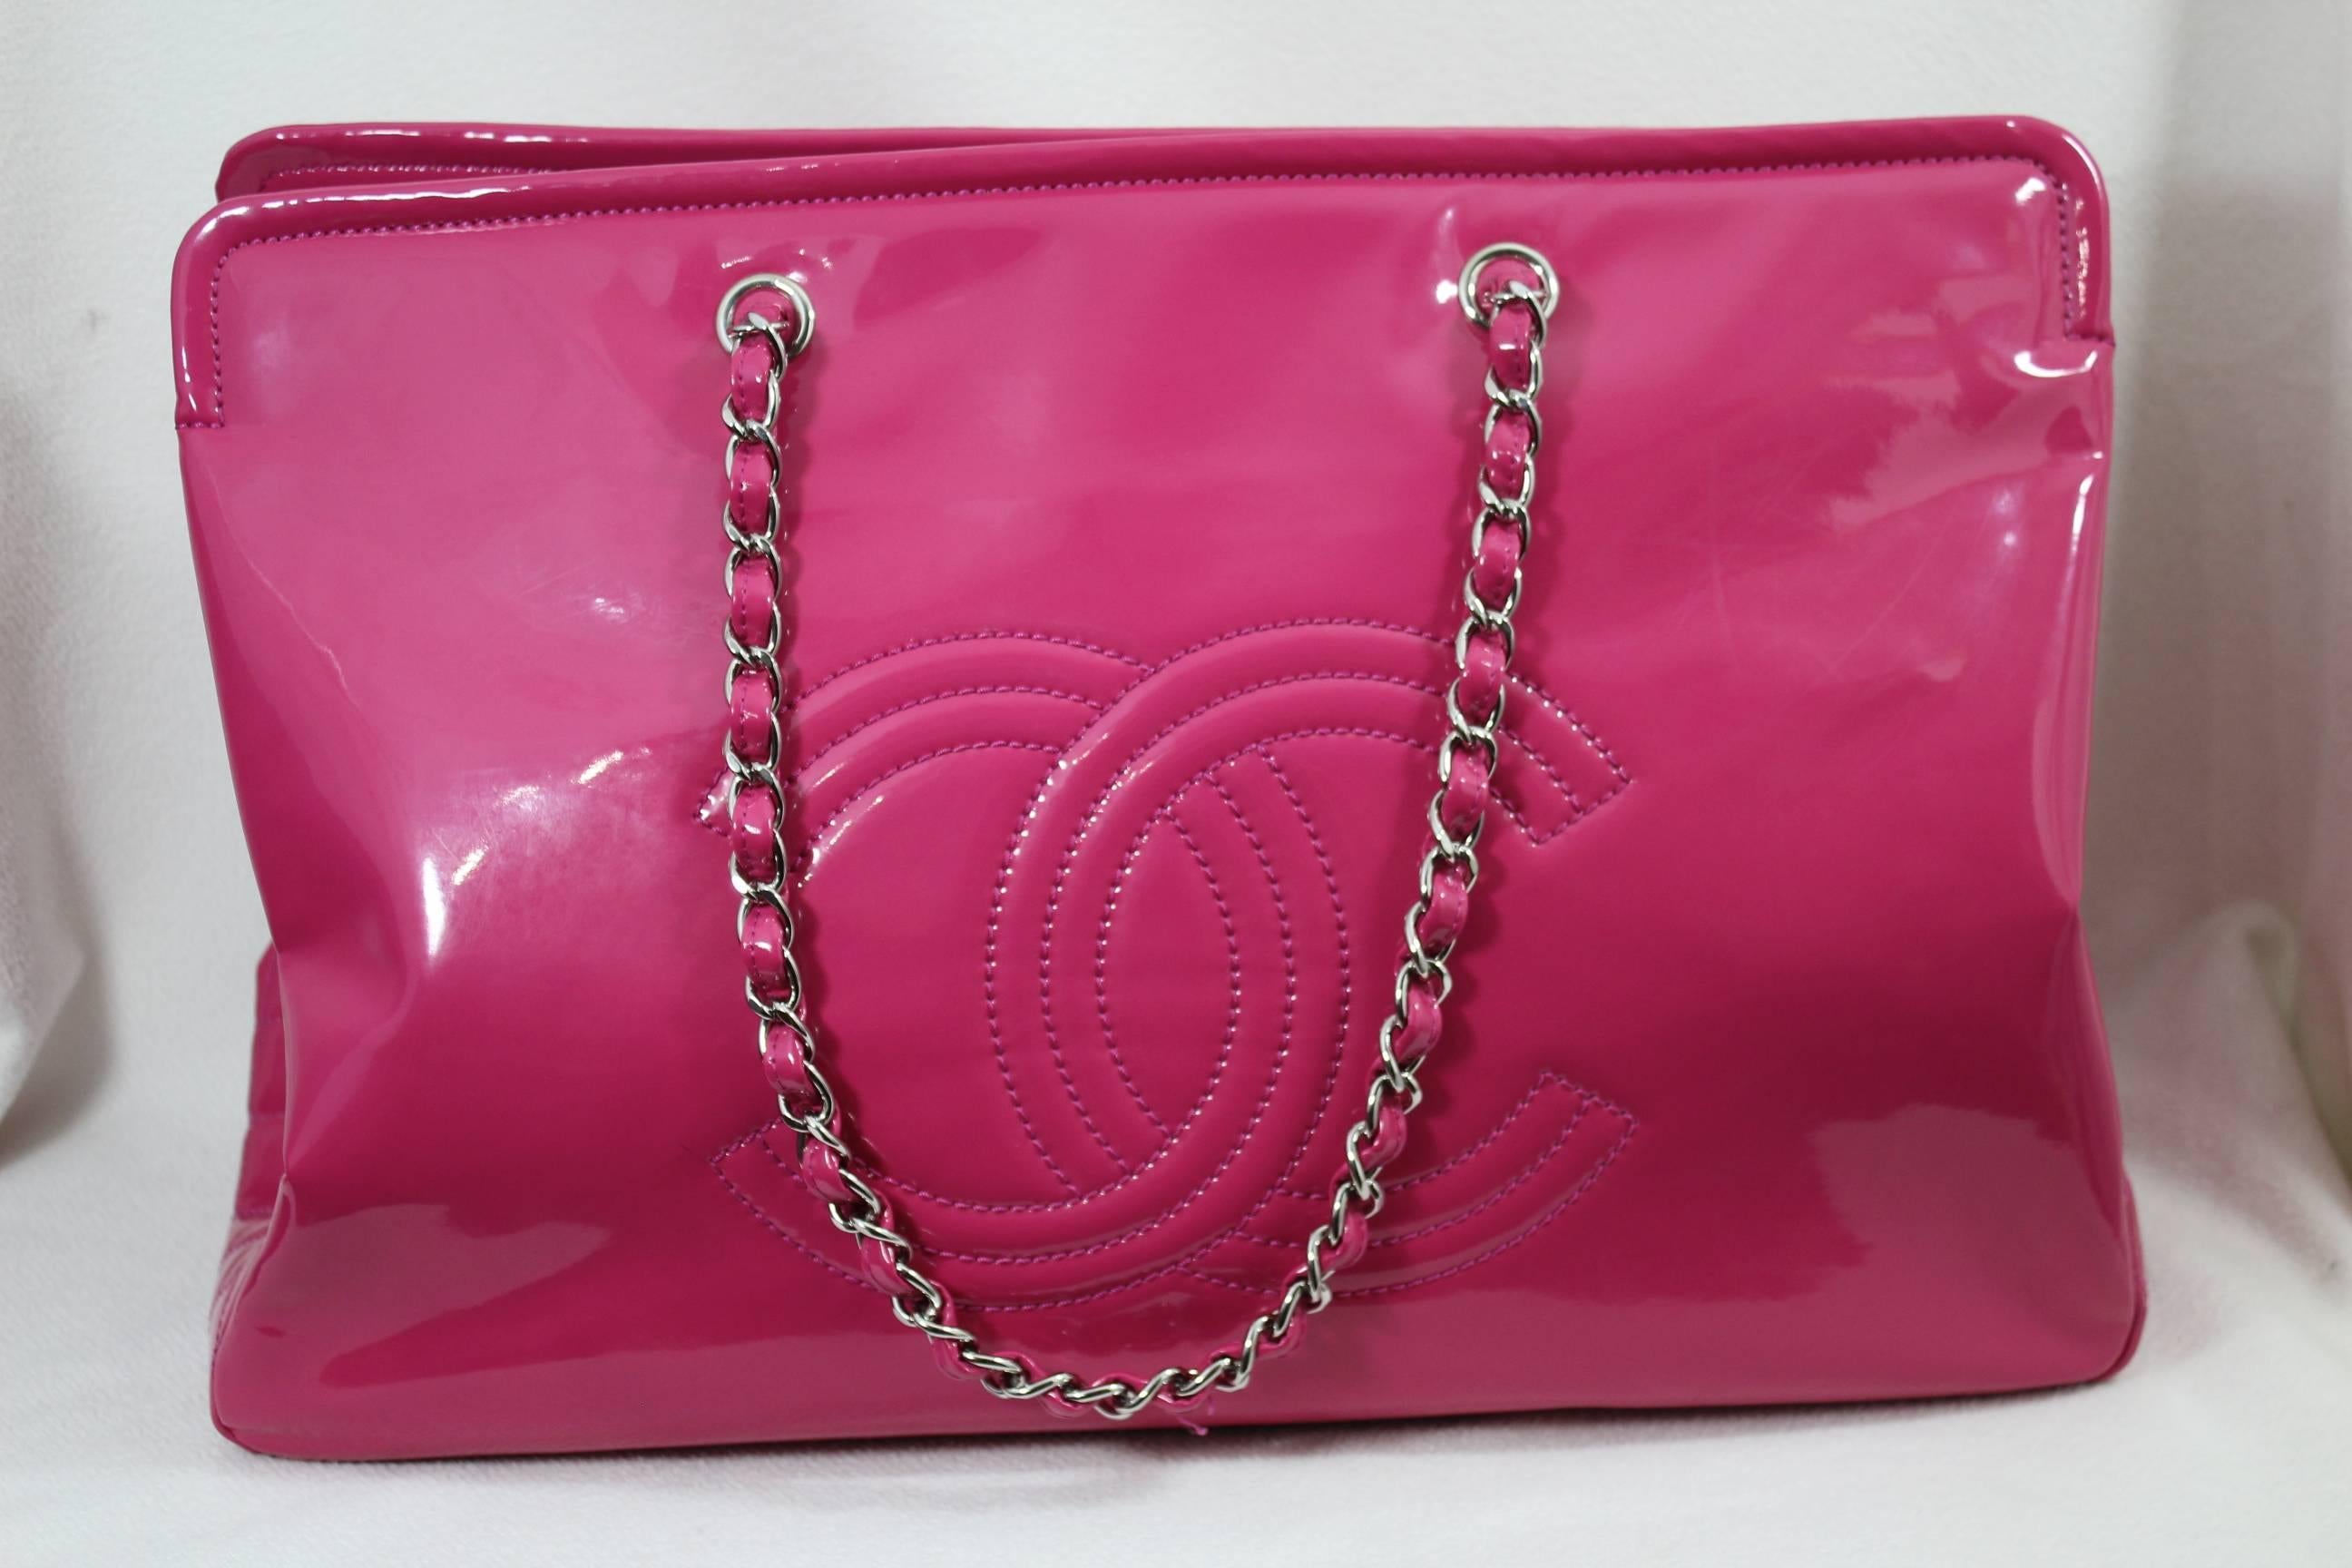 Lovely Chanel Flashy Patented Leather Pink Bag. Big size 2